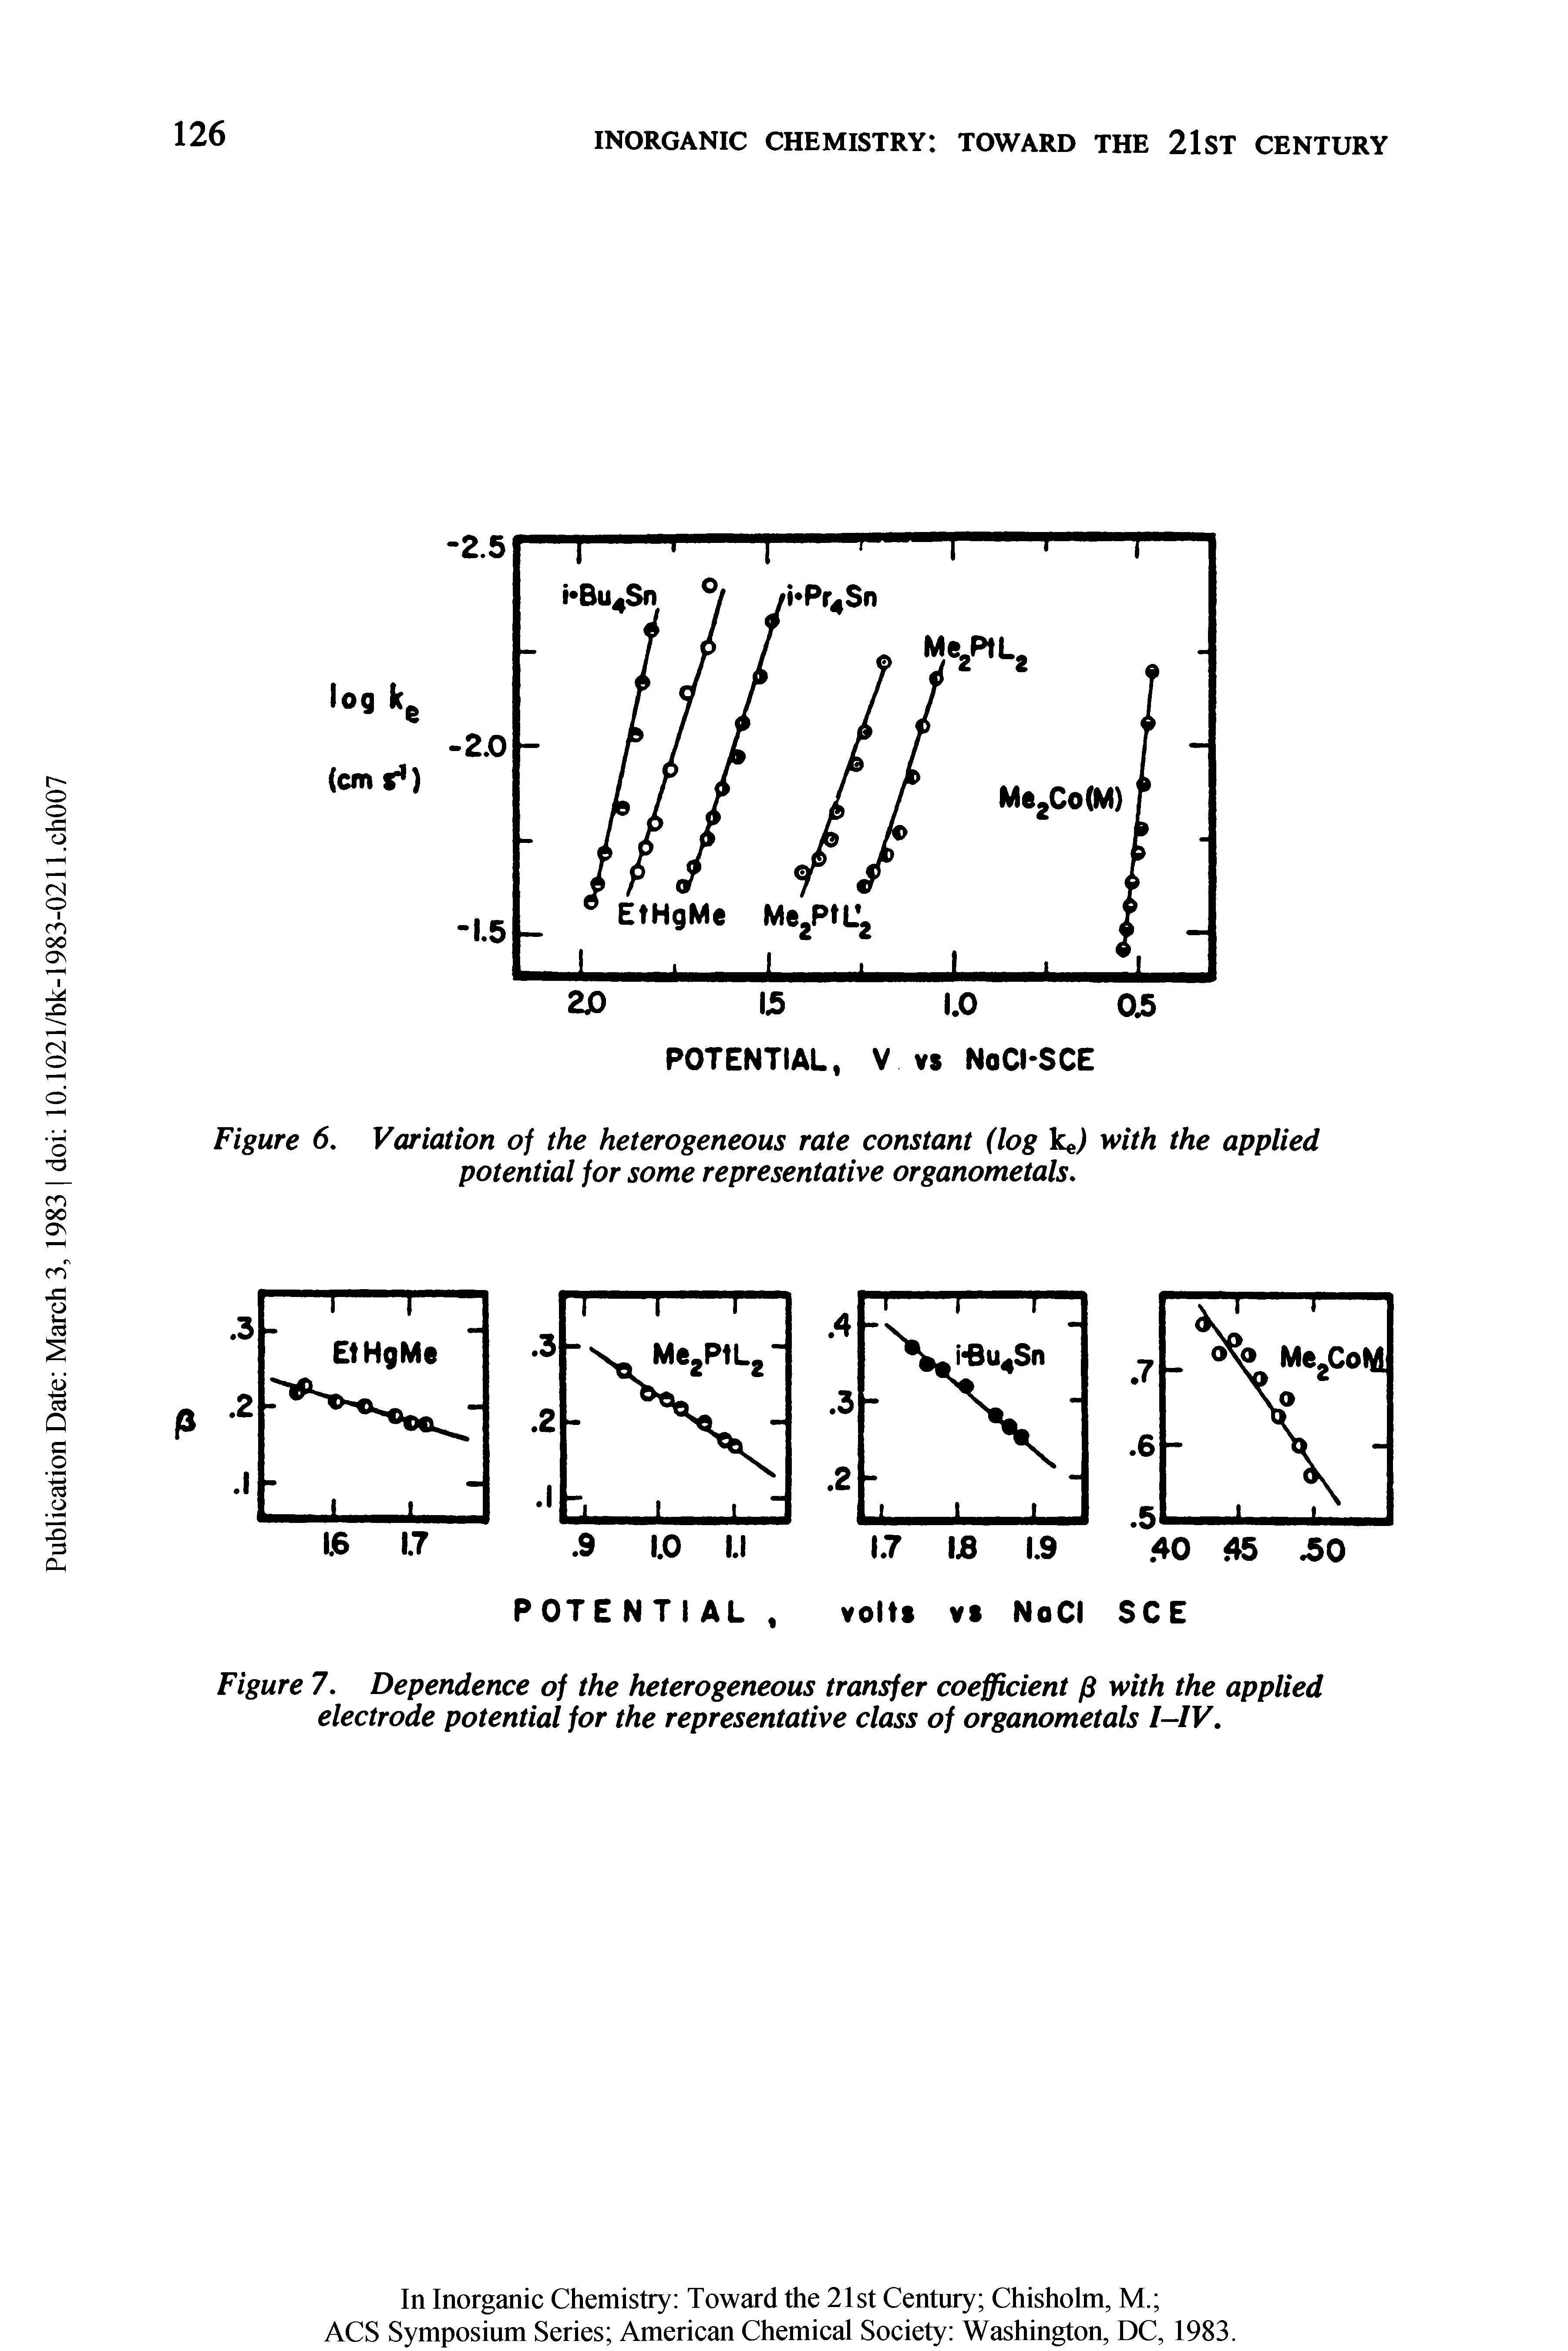 Figure 6. Variation of the heterogeneous rate constant (log kj with the applied potential for some representative organometals.